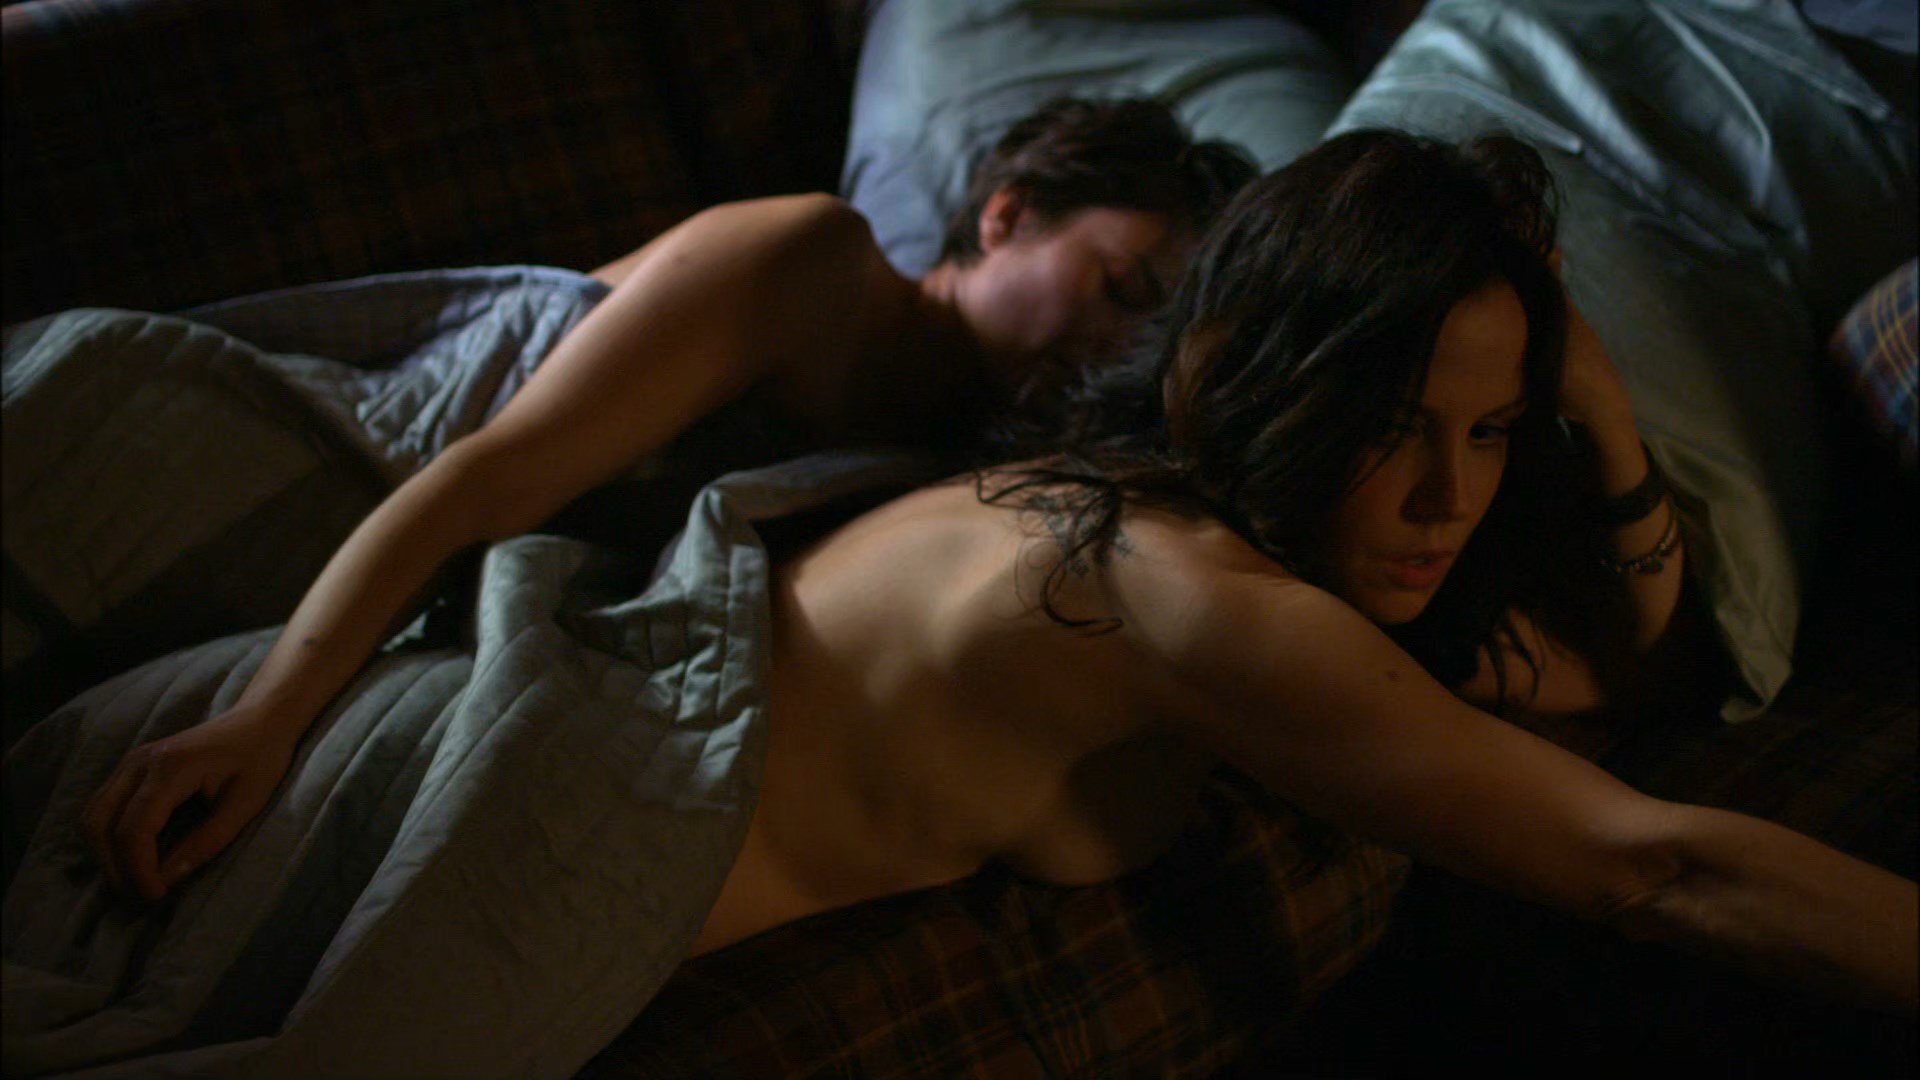 Mary-Louise Parker + Others - Weeds Complete Series Megapost.